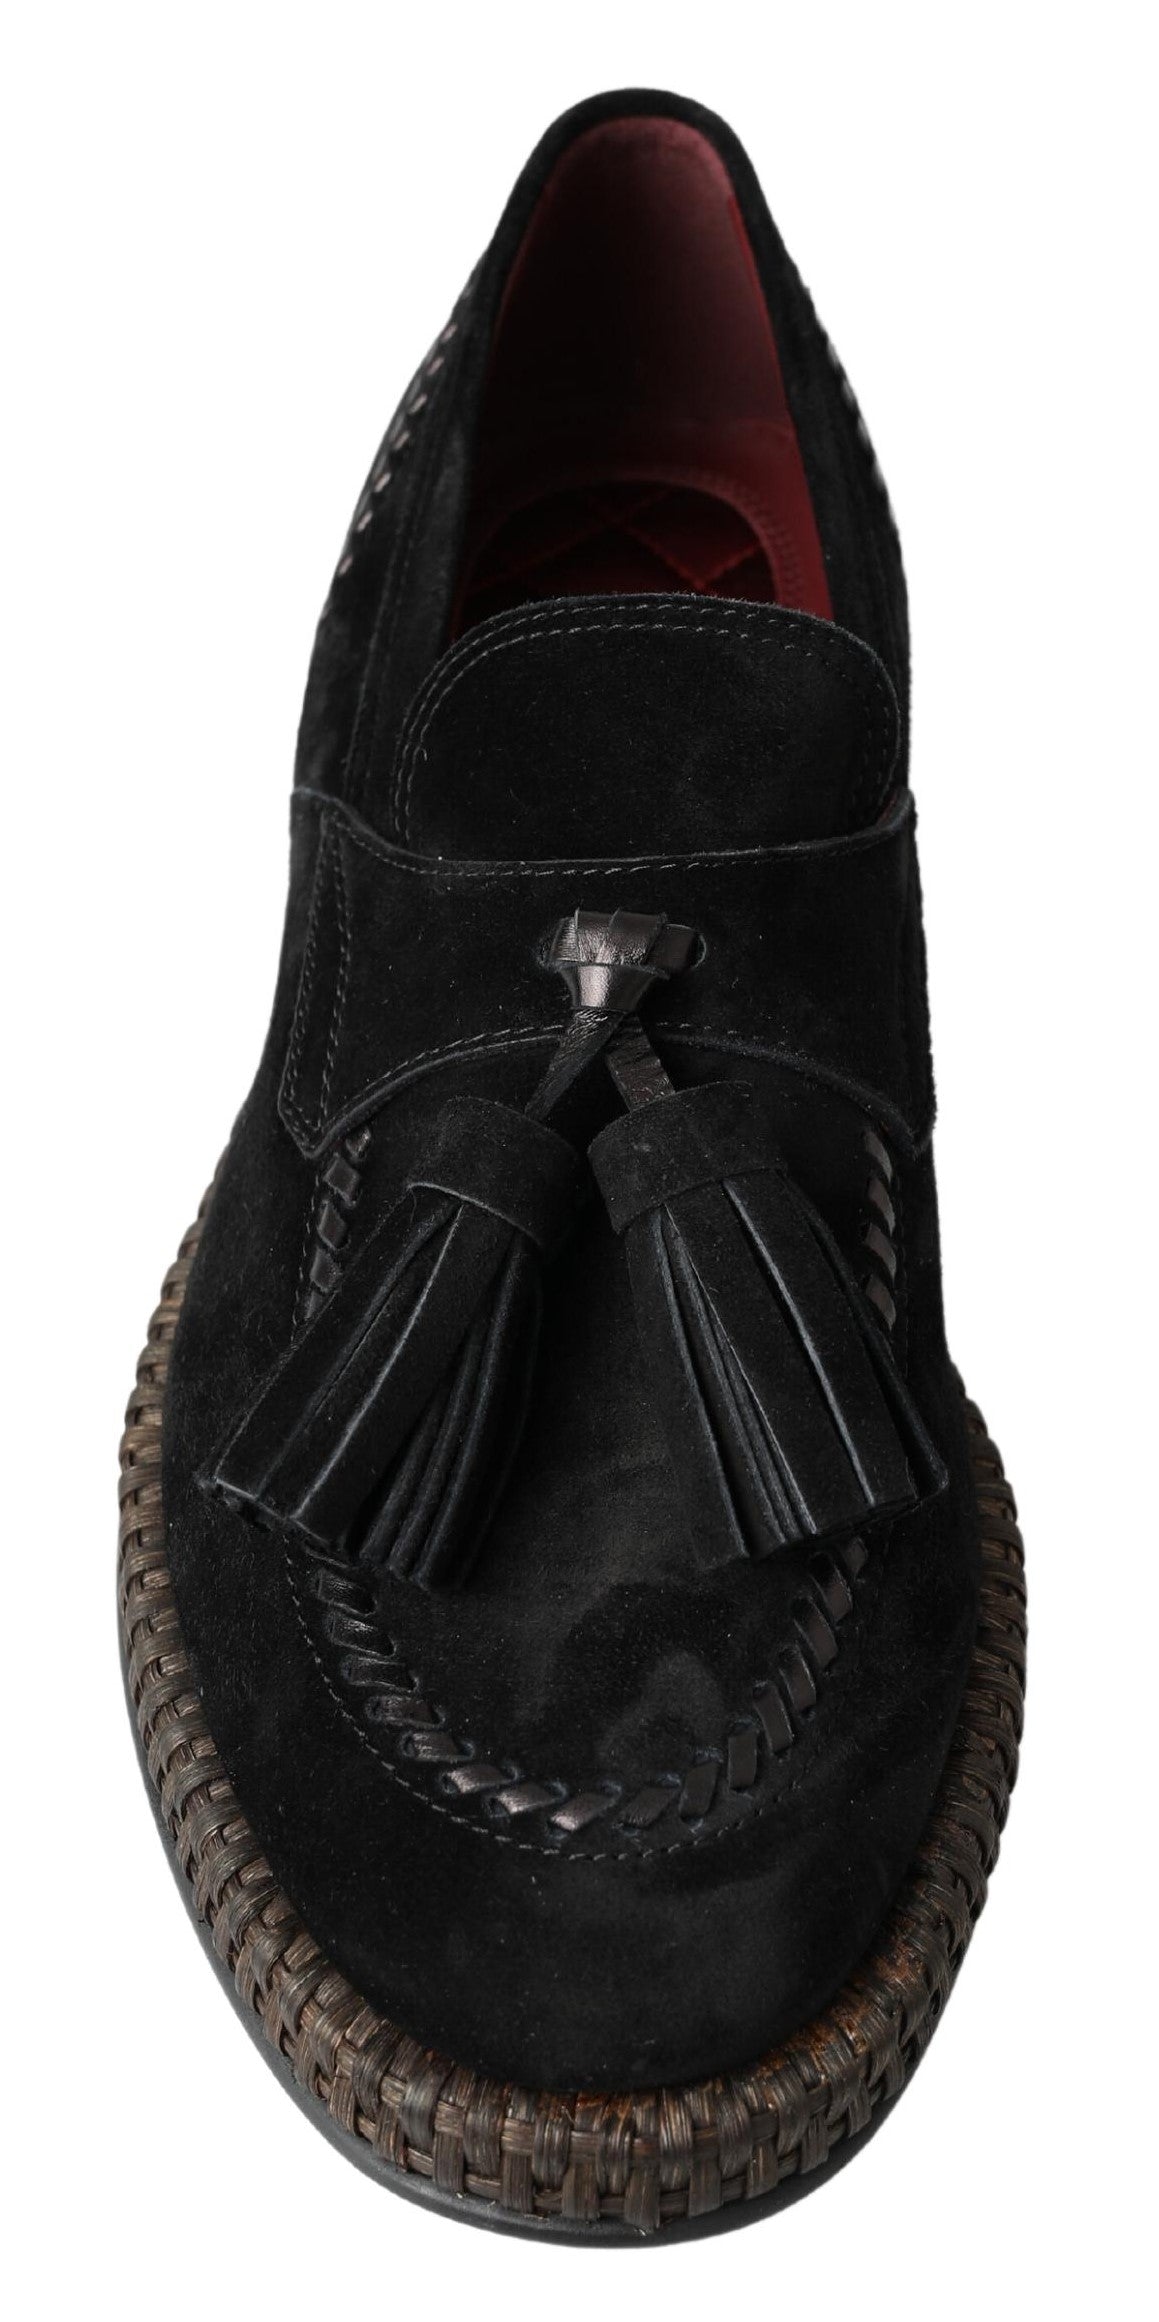 Dolce & gabbana Black Suede Leather Casual Espadrille Shoes